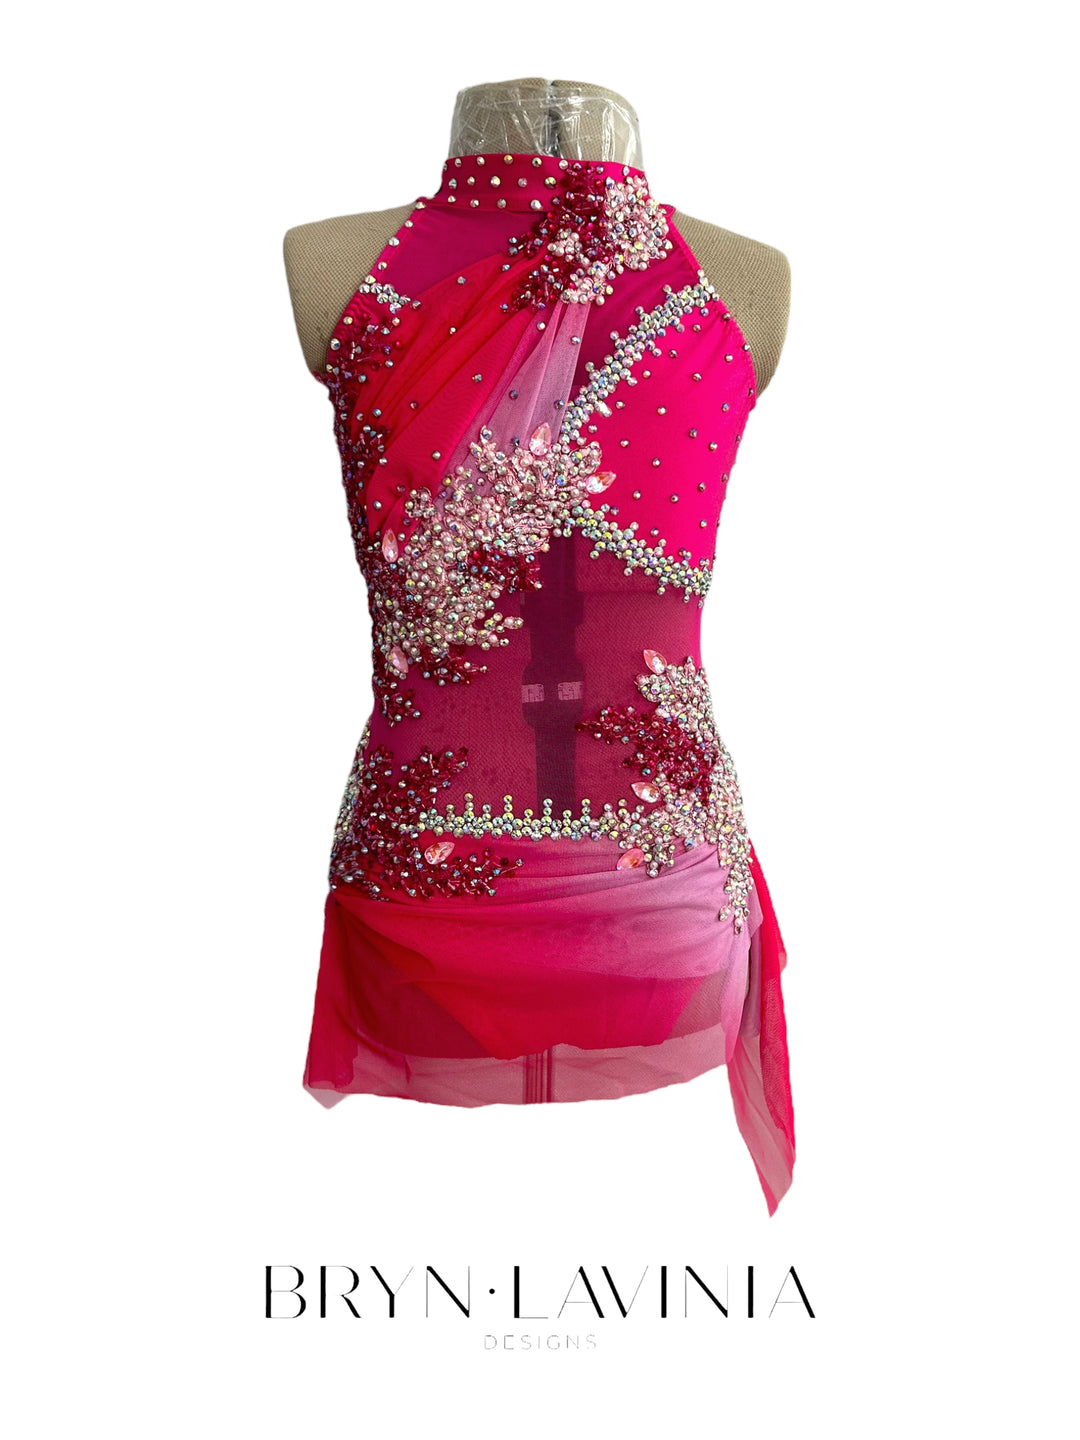 NEW CL fuchsia/light pink ombré ready to ship costume